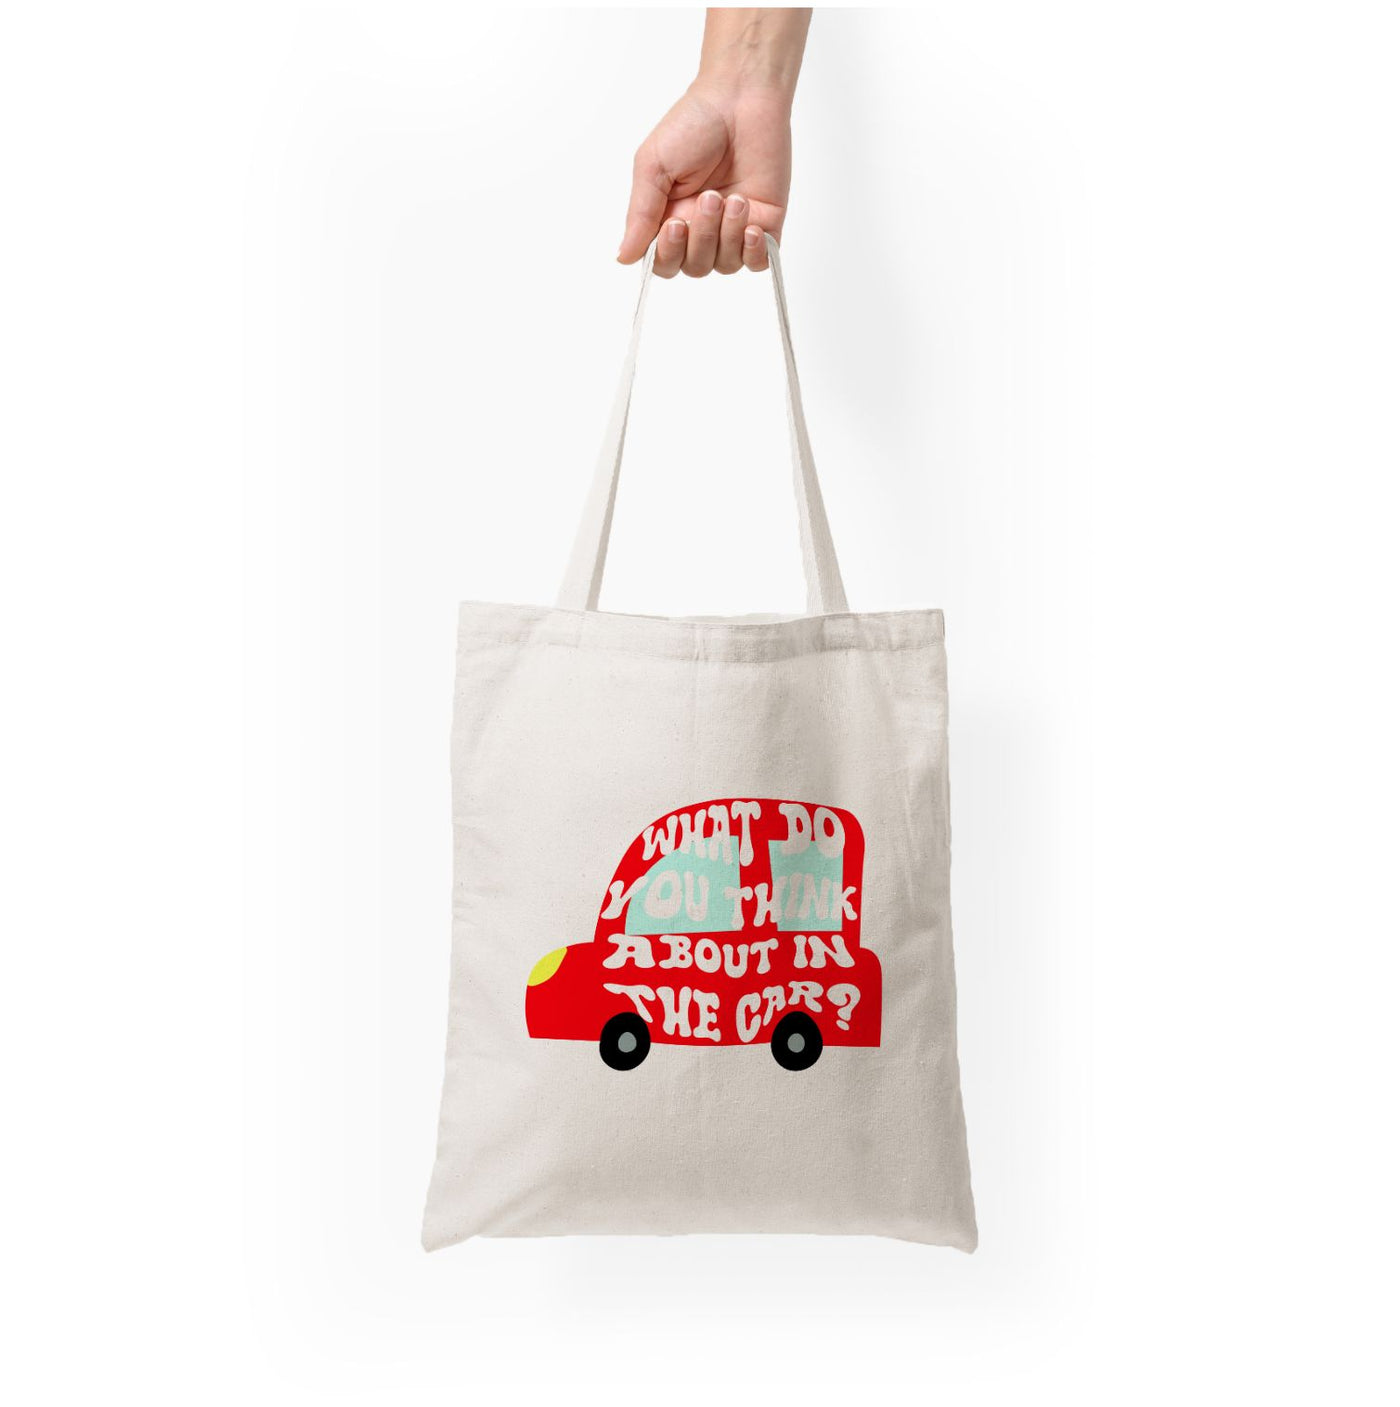 What Do You Think About In The Car? - Declan Mckenna Tote Bag